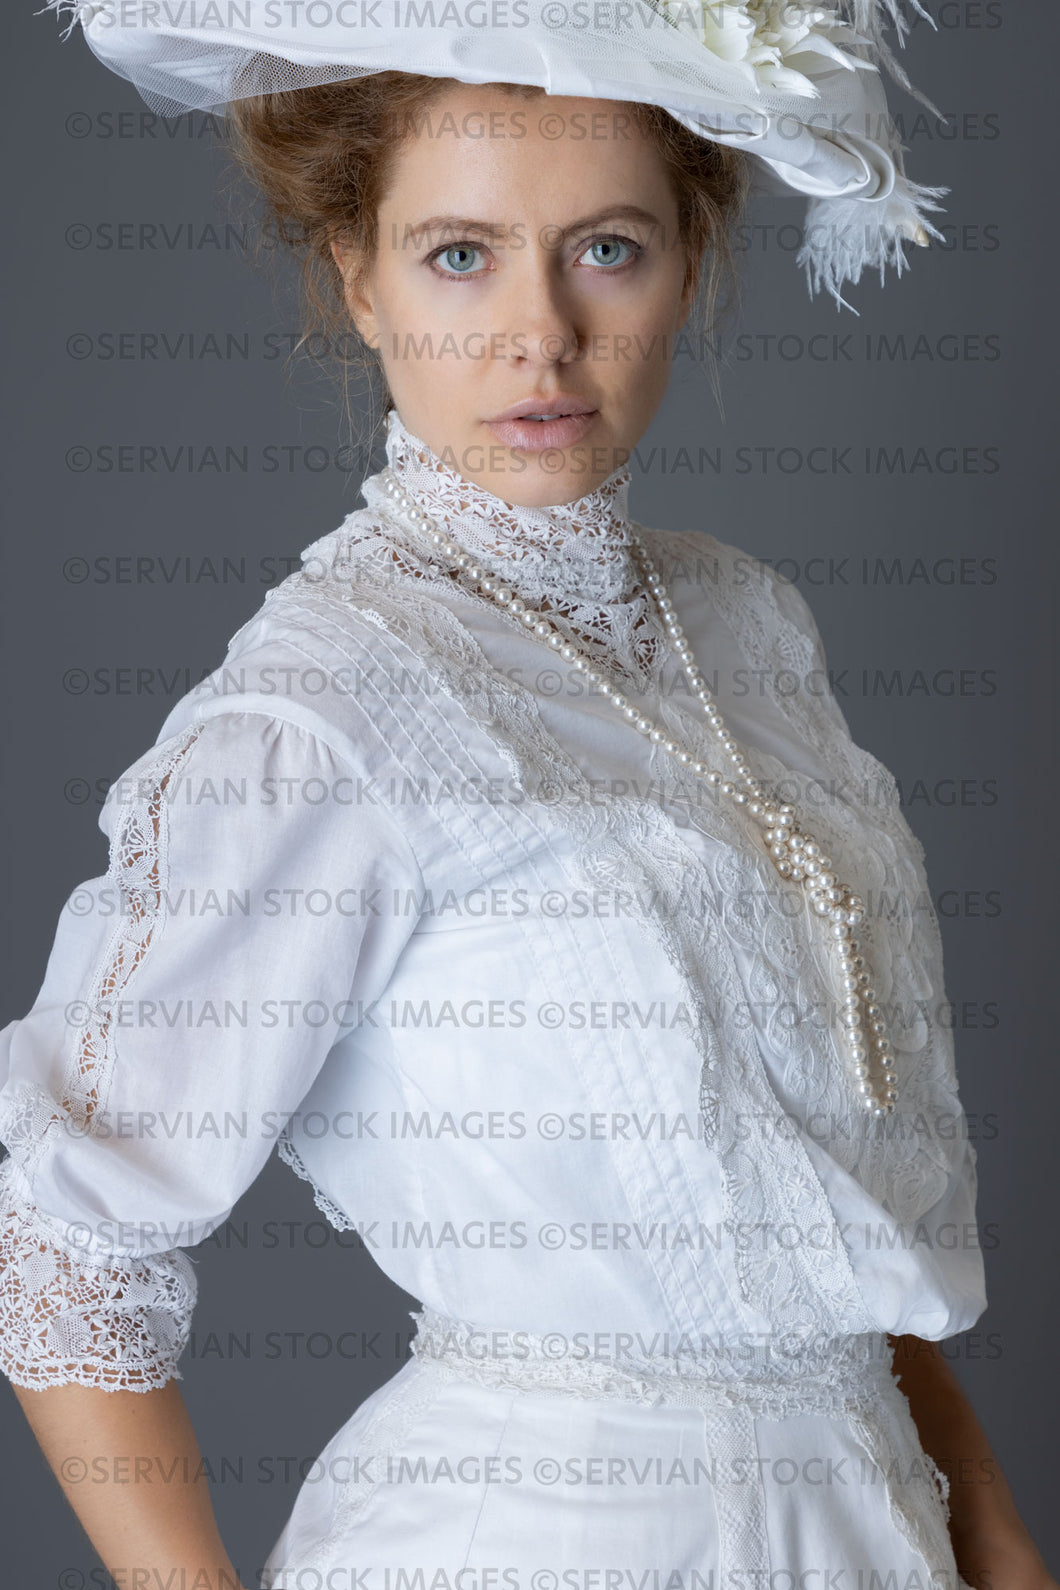 Edwardian woman in a white lace blouse and skirt with a pearl necklace (Anastasiya 4948)